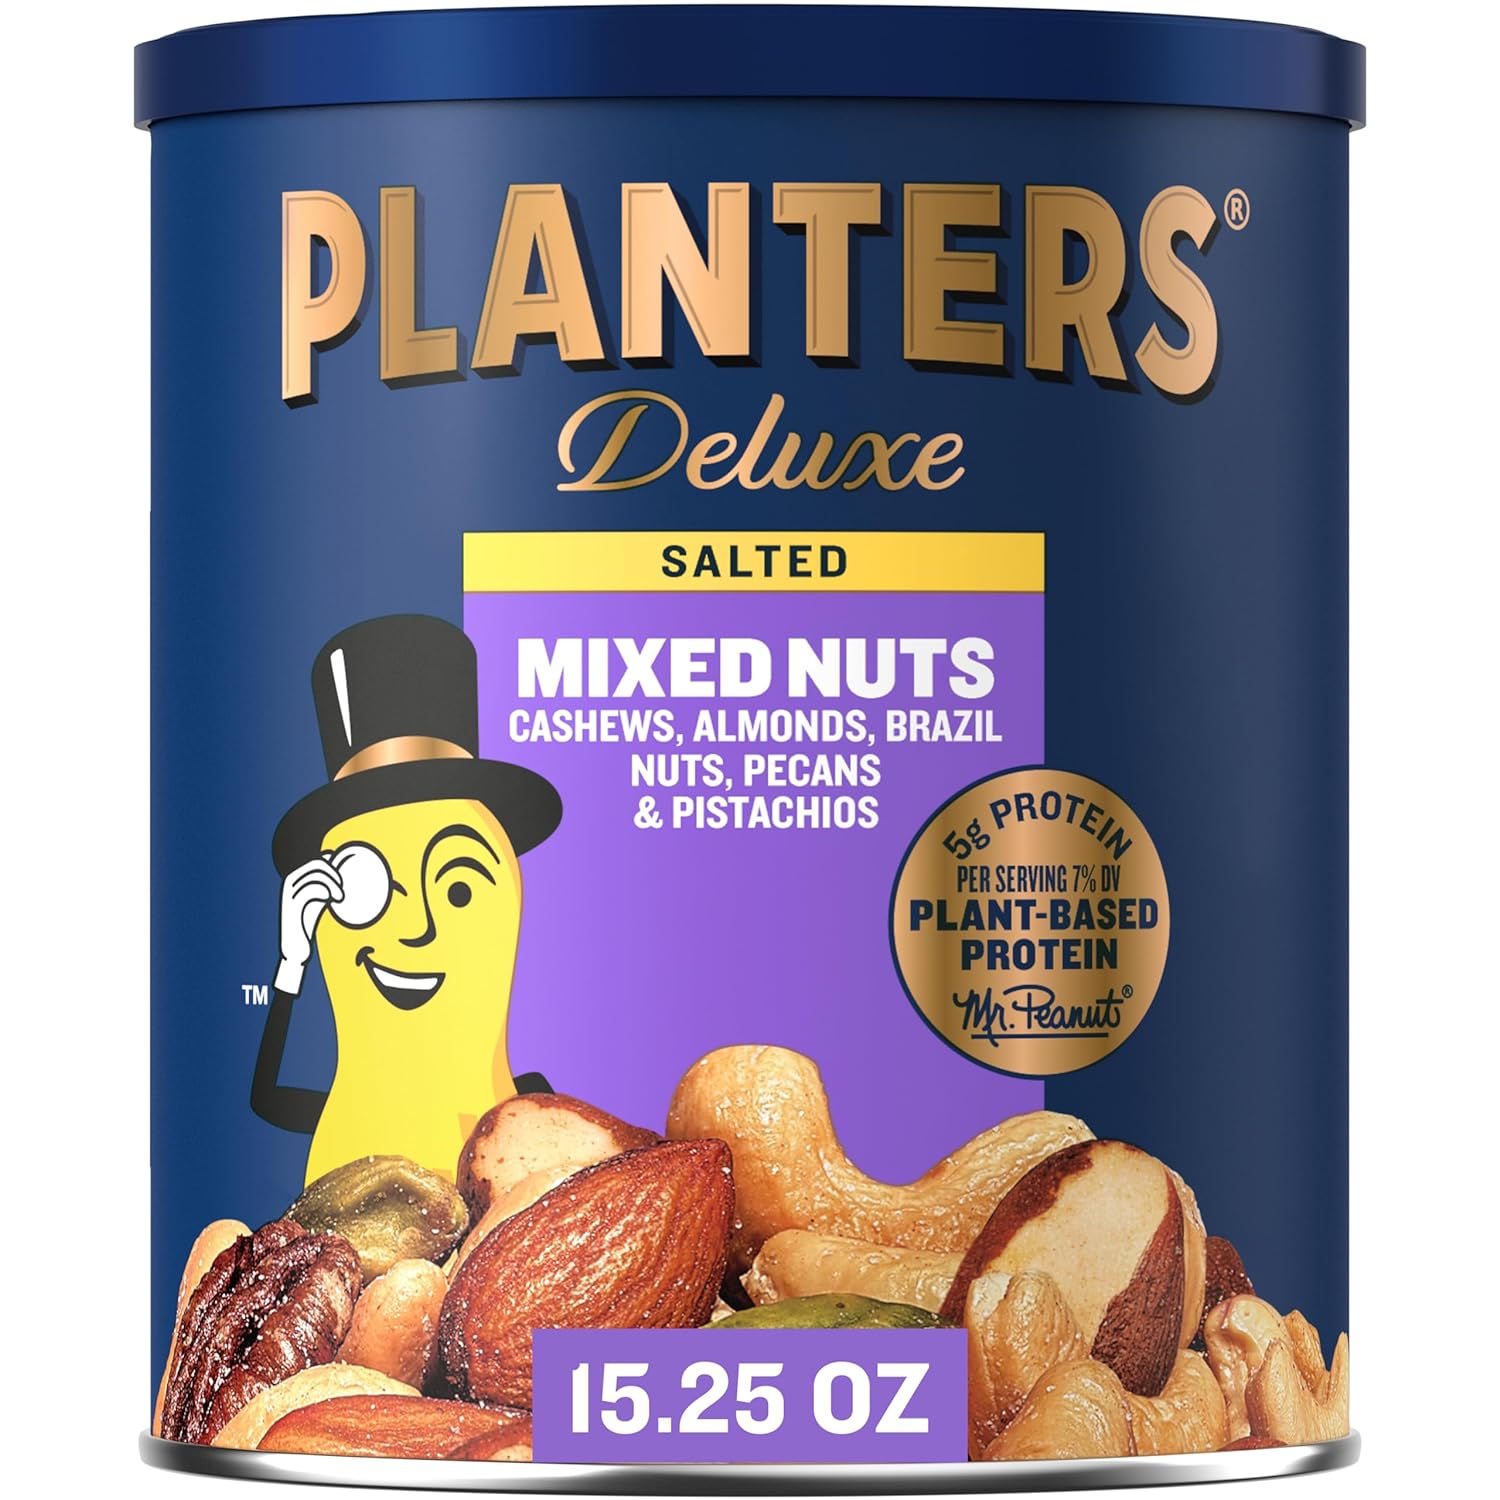 Walmart was out, so purchased here. Great nuts when you can find them. Not salty, just a little for taste.